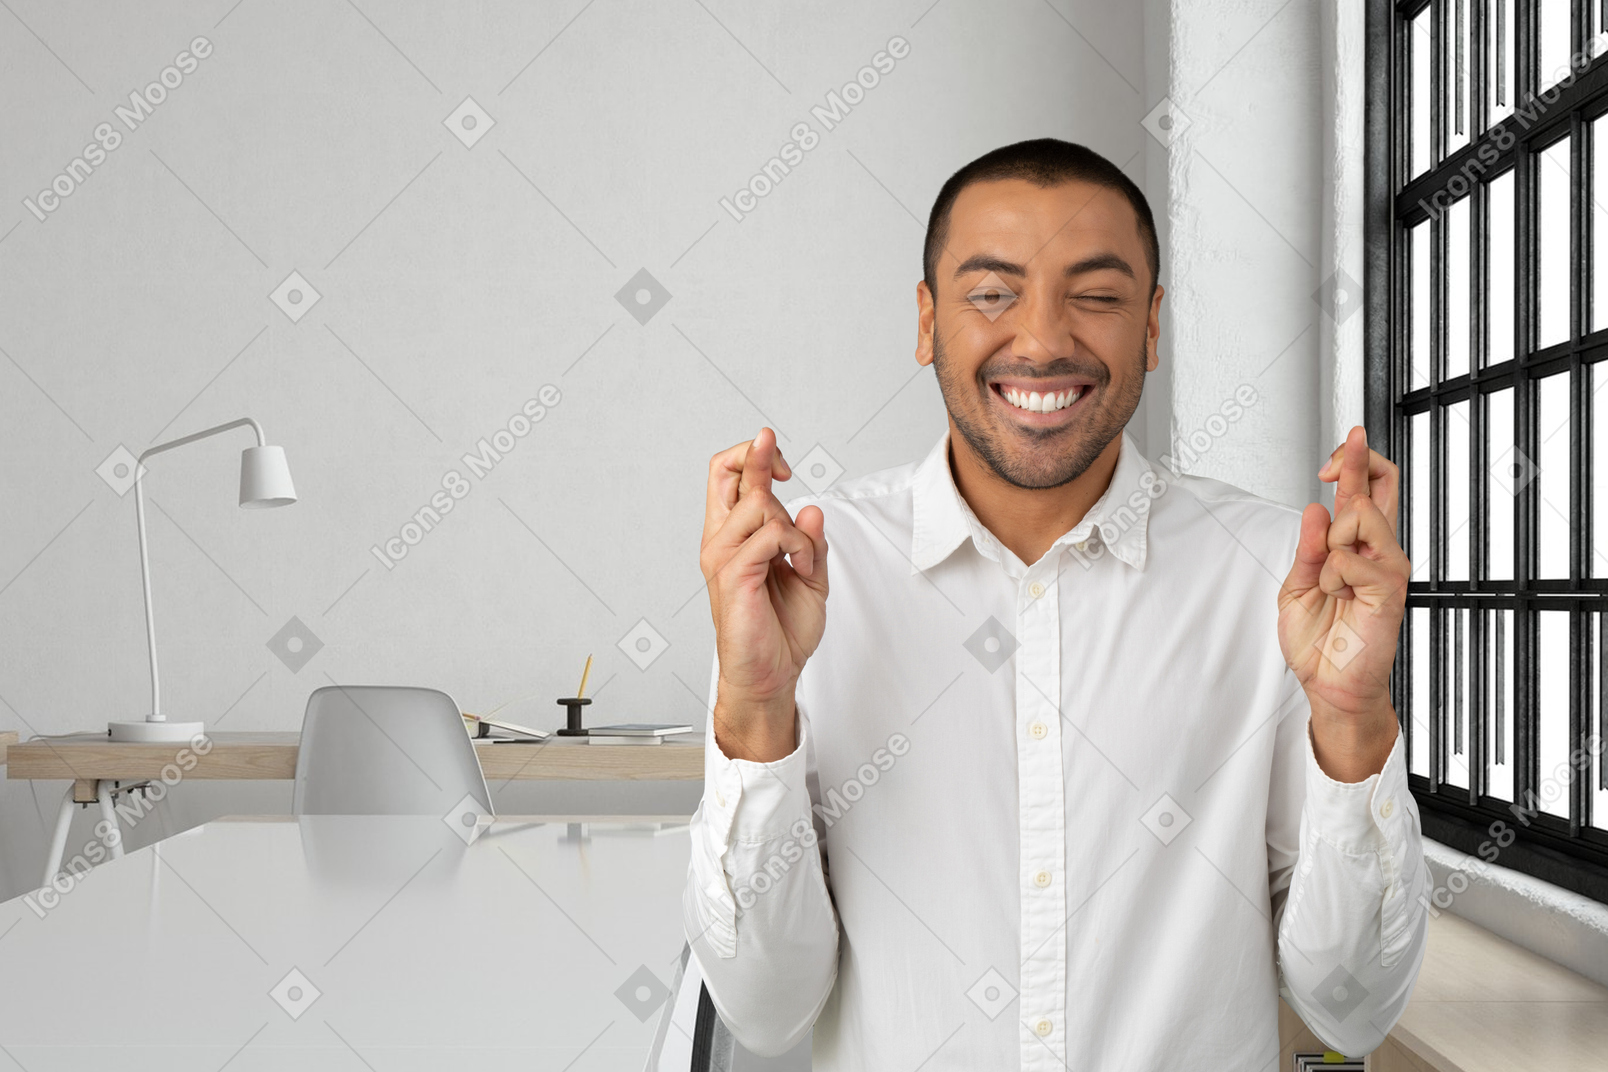 A smiling man crossing his fingers in an office